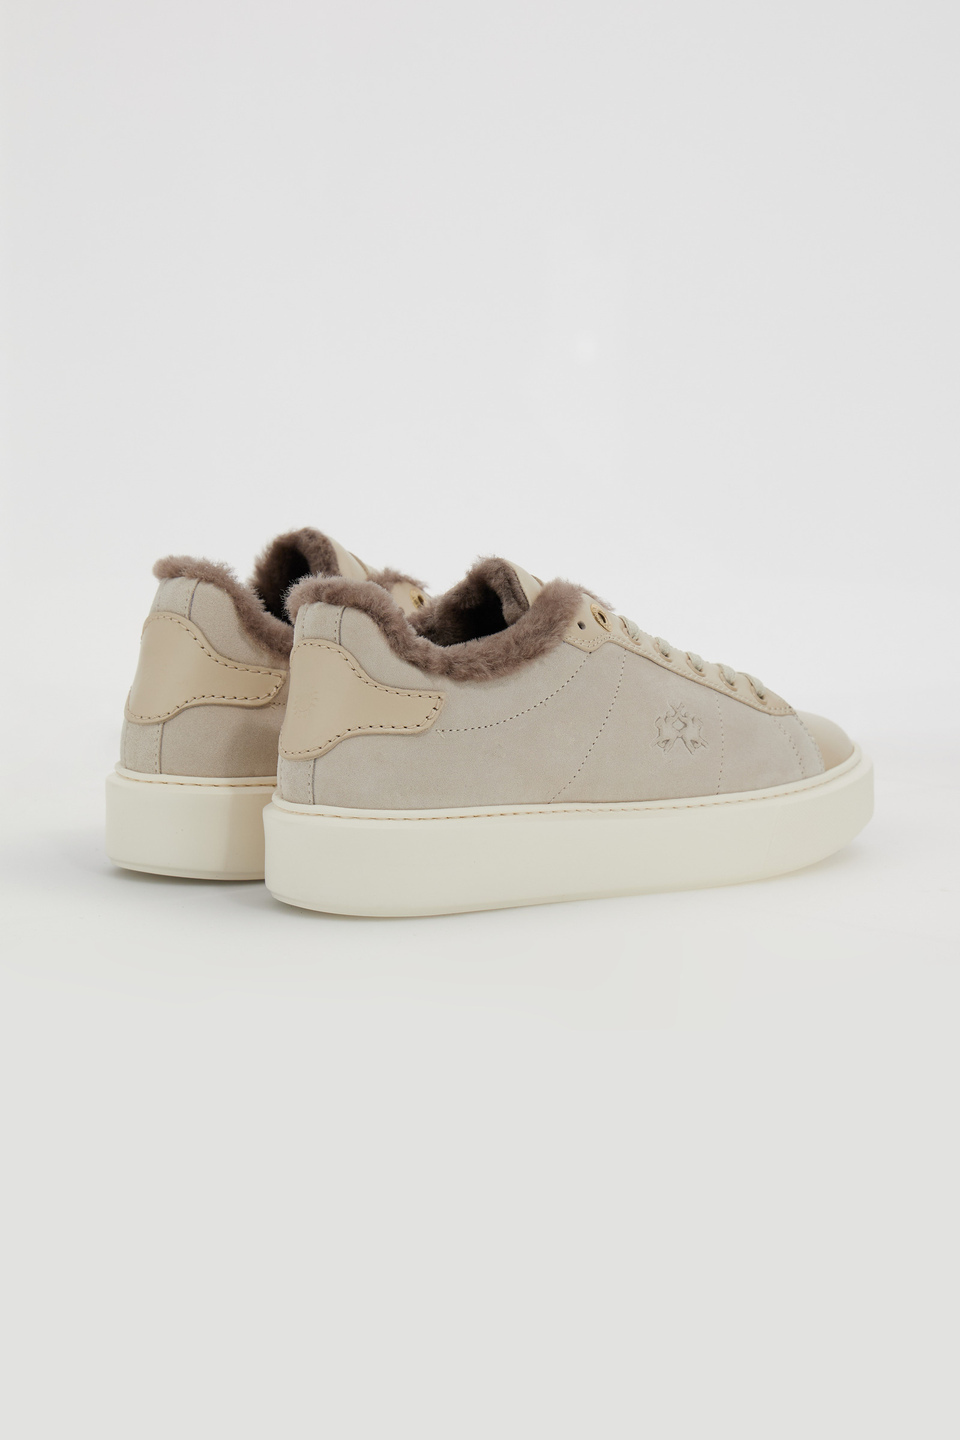 Women's trainers with inner lining | La Martina - Official Online Shop